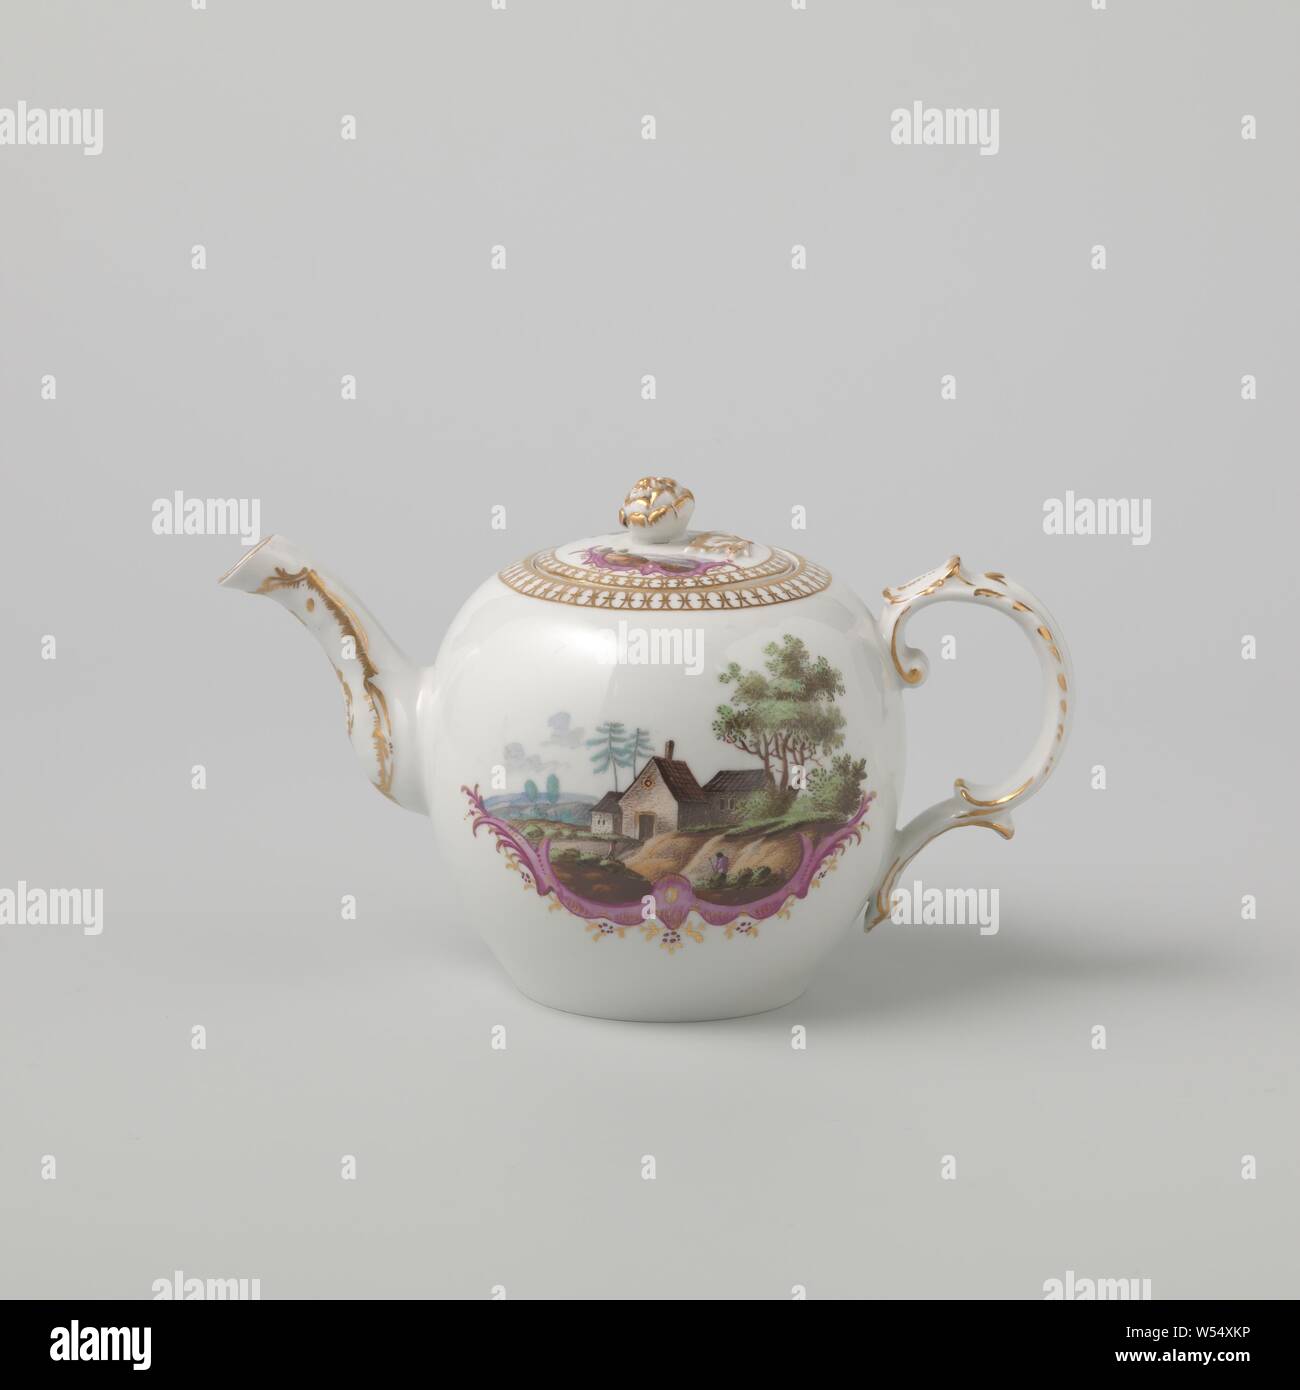 Cover of a teapot with two landscapes, Cover of a porcelain teapot, painted on the enamel in enamel colors and gold. Decorated with twice a landscape, including a rocaille band. A decorative band on the edge. Cover button in the shape of a flower branch., Fürstenberg, c. 1765 - c. 1775, porcelain (material), glaze, gold (metal), vitrification, h 2.6 cm d 5.1 cm Stock Photo